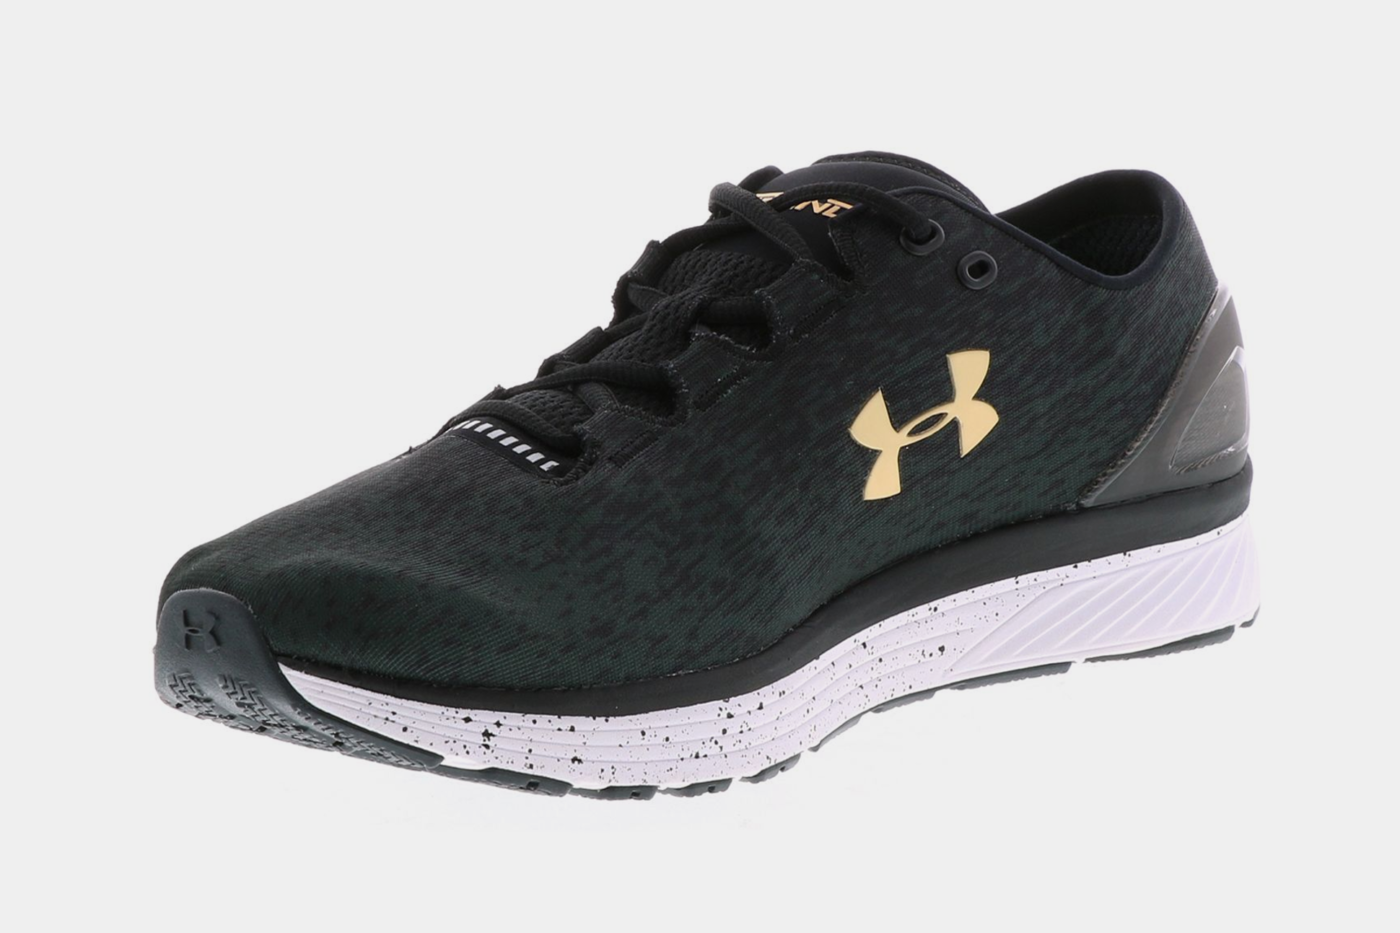 Under Armour Charged Bandit 3 Men’s Running Shoe